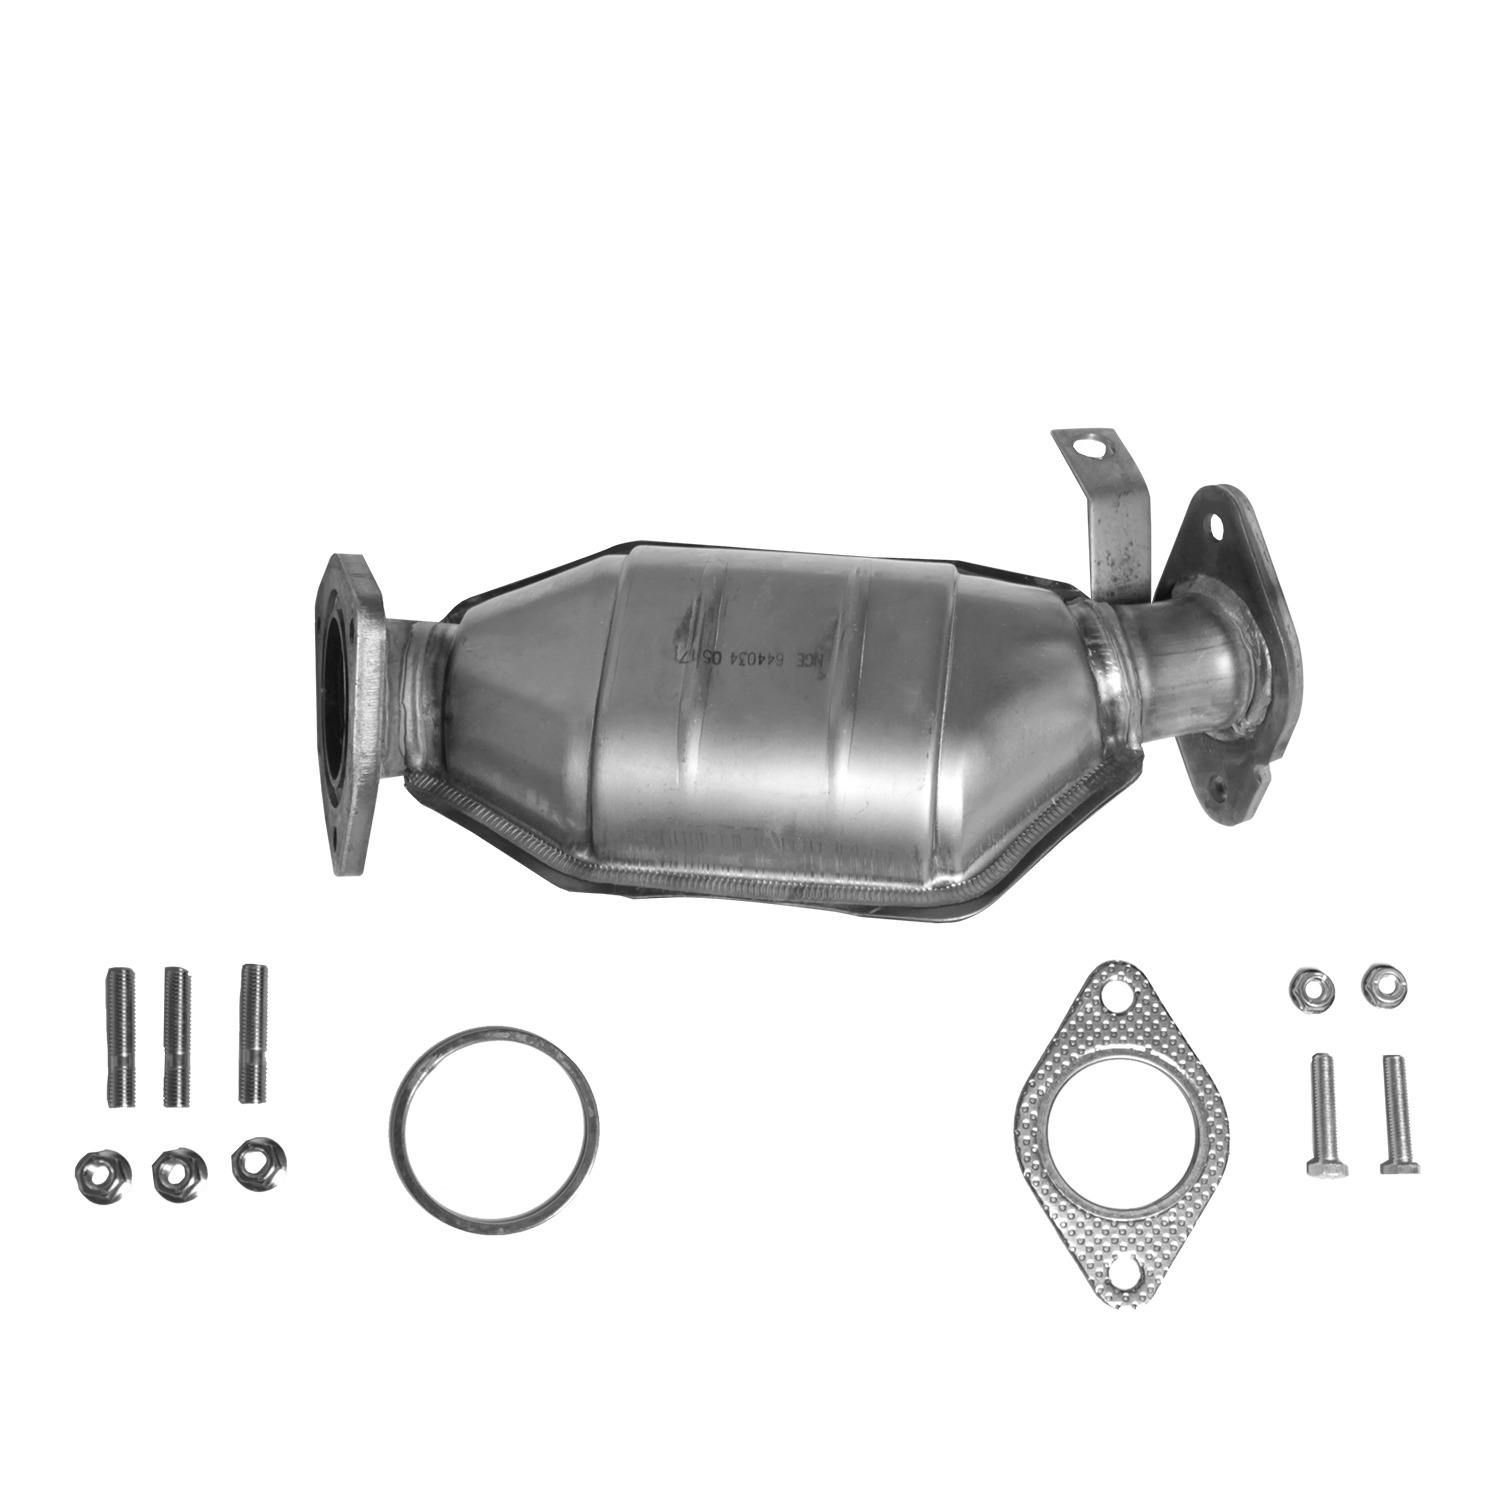 2008 - 2015 Buick Enclave/2009 - 2015 Chevrolet Traverse/2007 - 2016 GMC Acadia/2007 - 2010 Saturn Outlook 3.6L Front Left Catalytic Converter